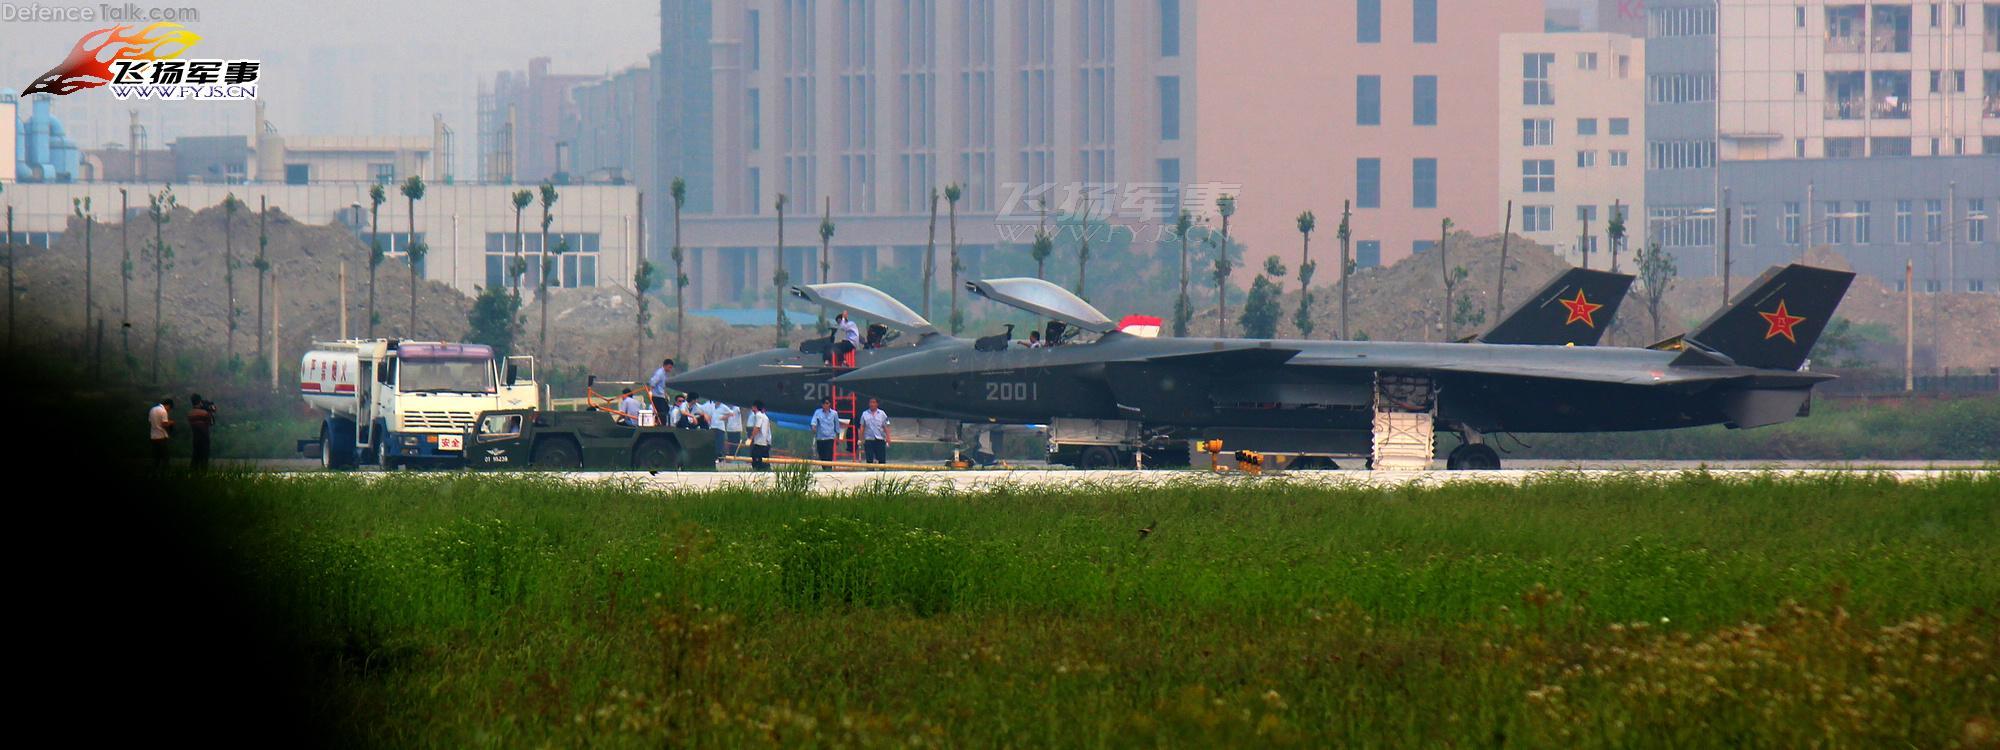 J-20 Prototype parked - China Air Force